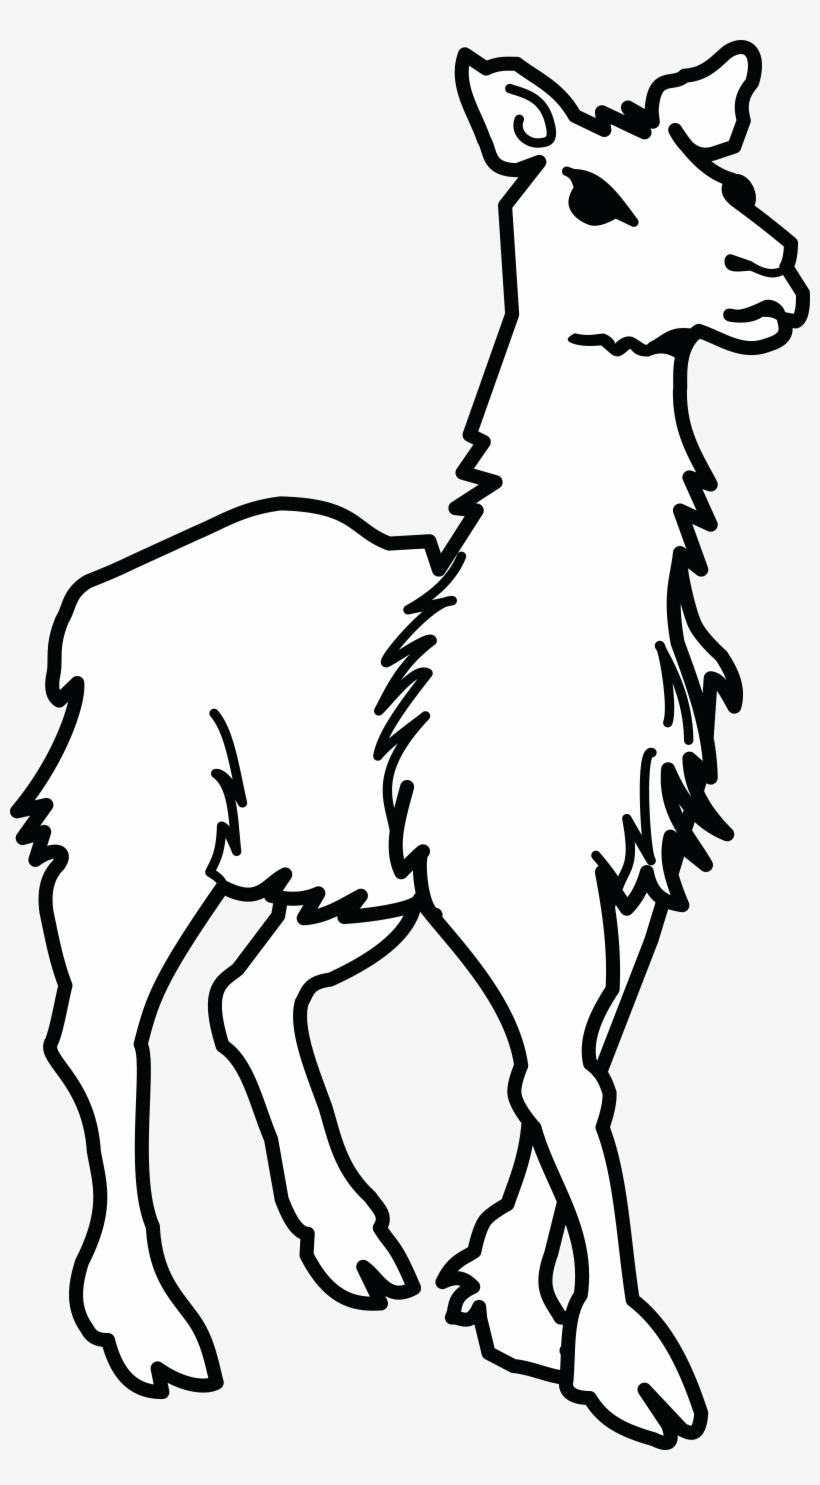 This Free Icons Png Design Of Llama Lineart - Clipart Of Llama Black And White, transparent png #1492092